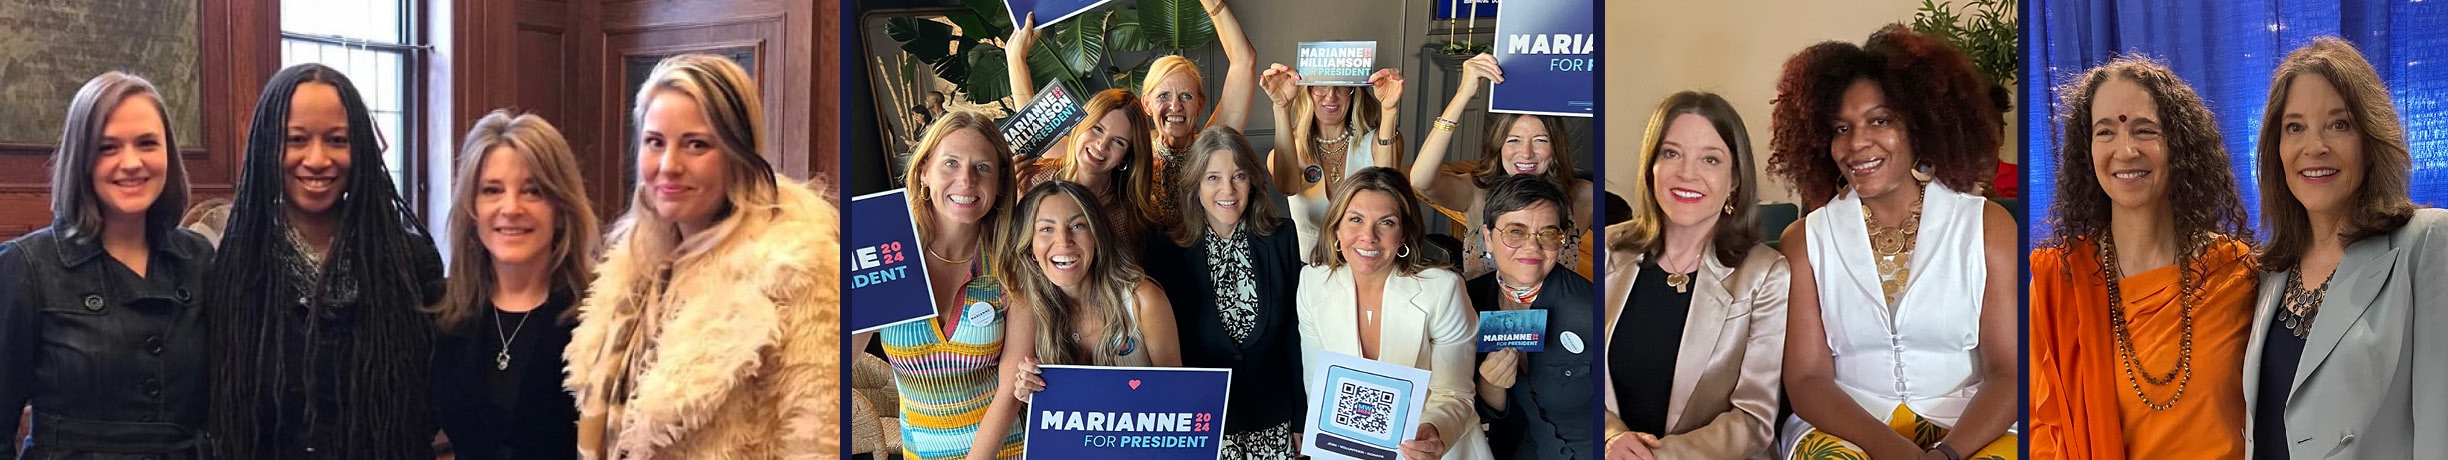 A collage of women posing for a photo to promote the Women of Wellness campaign for Marianne 2024.